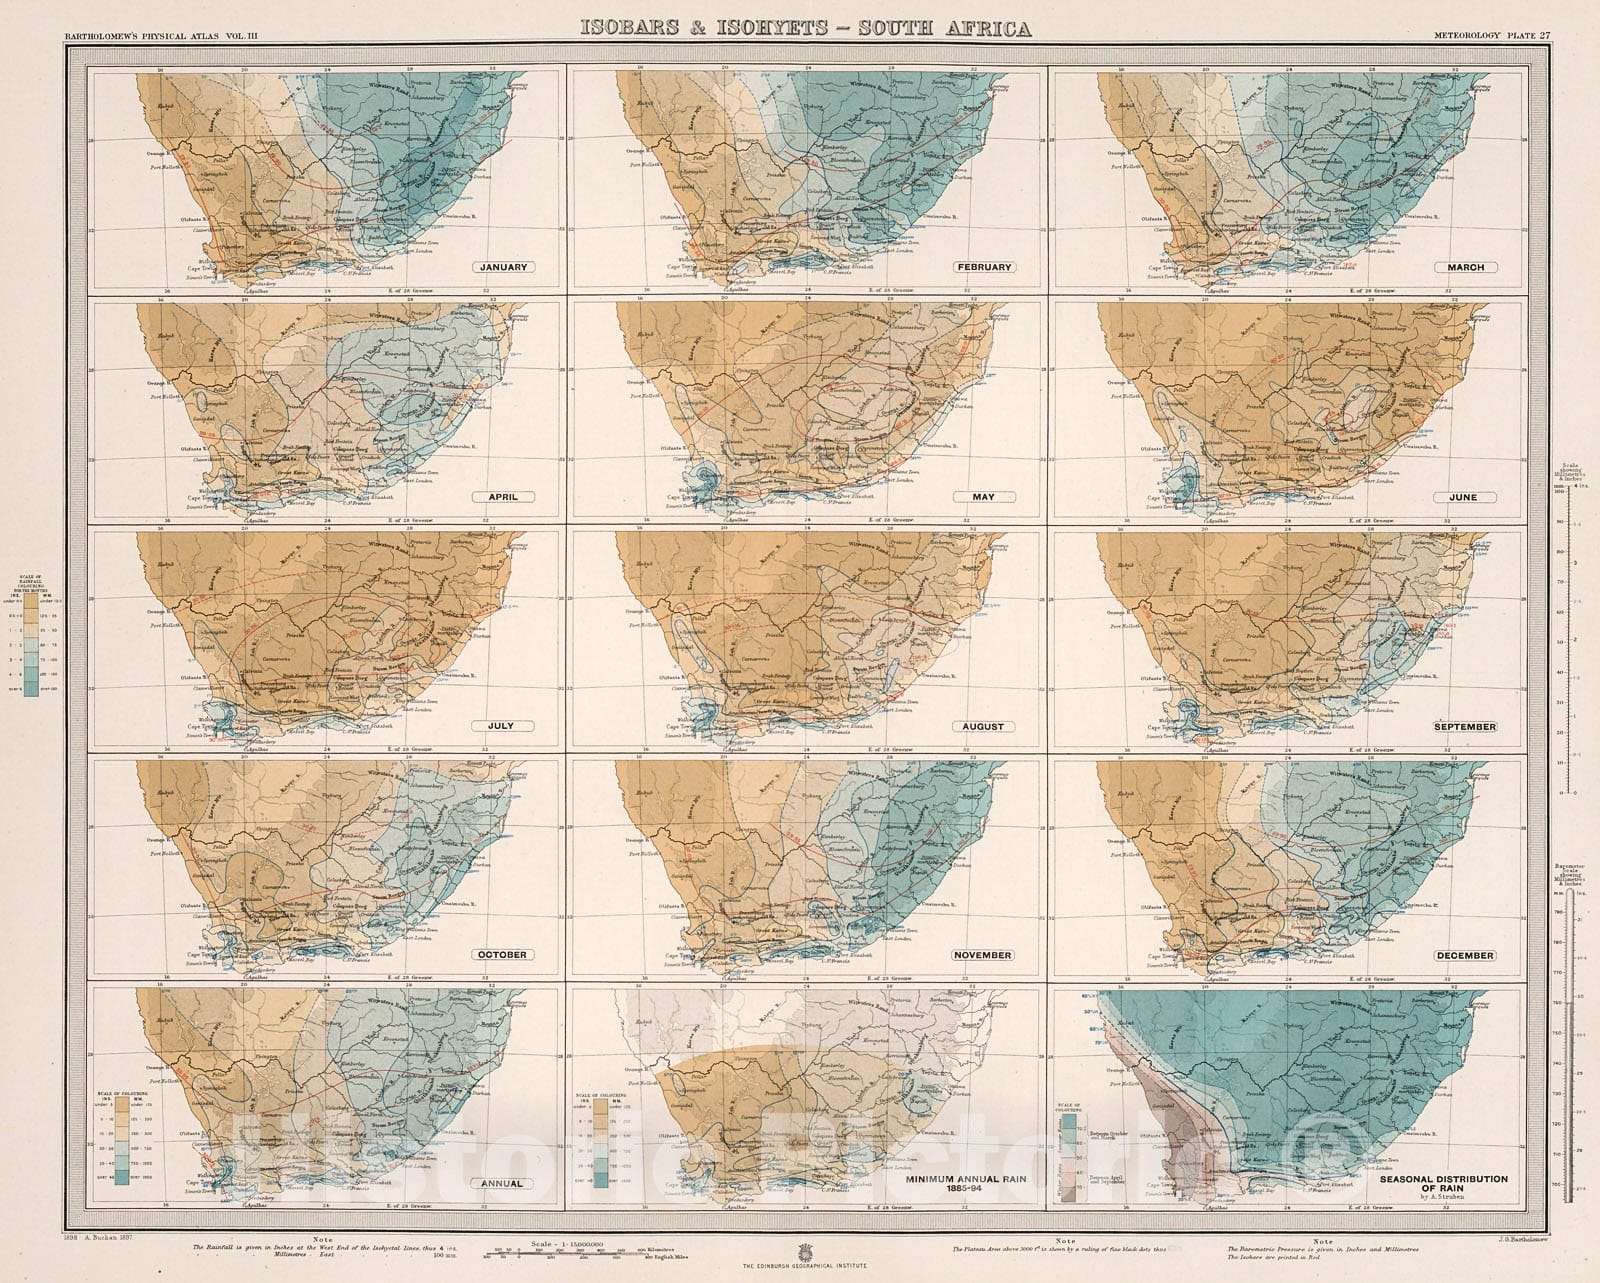 Historic Map : Plate 27. Isobars & Isohyets - South Africa., 1899, Vintage Wall Decor